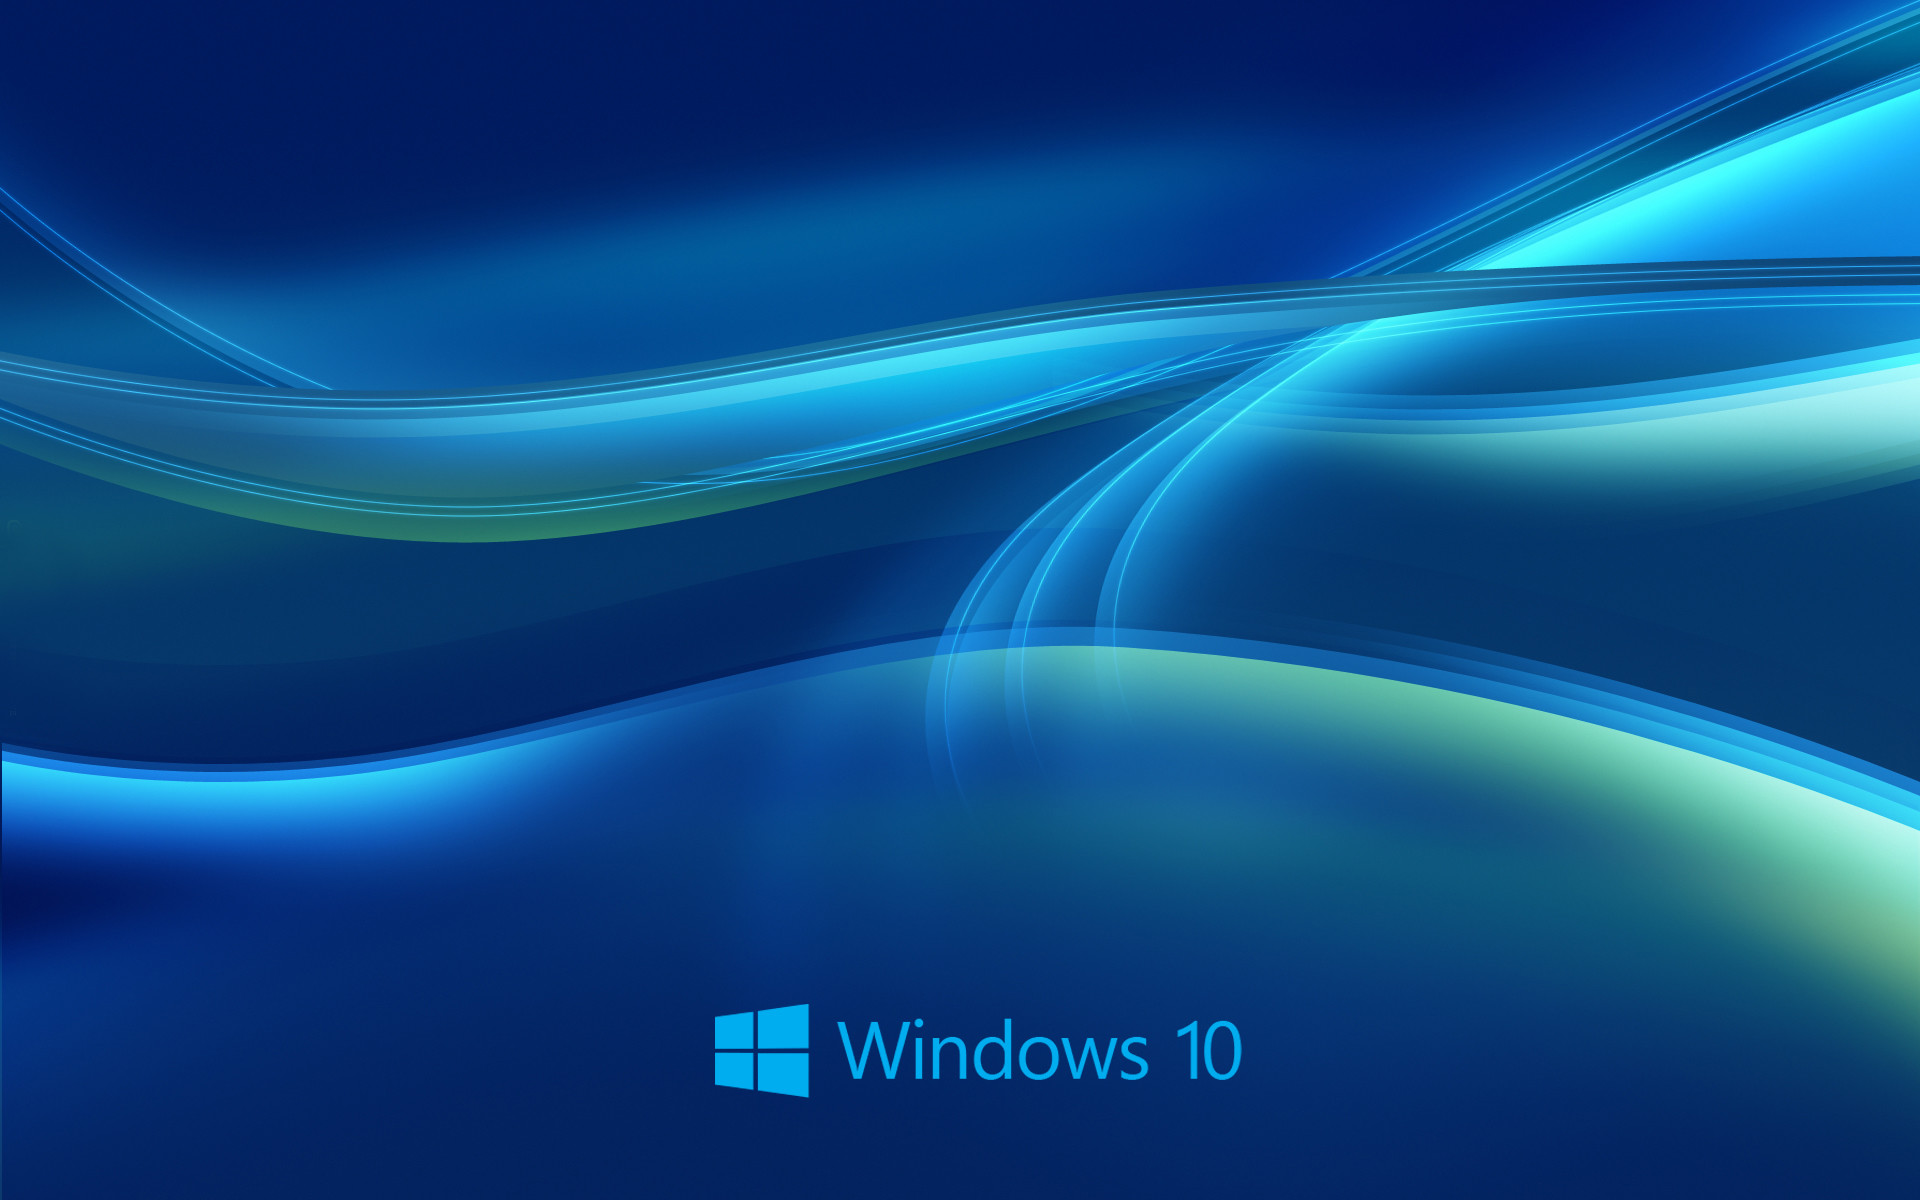 Windows 10 Wallpapers and themes (76+ images)